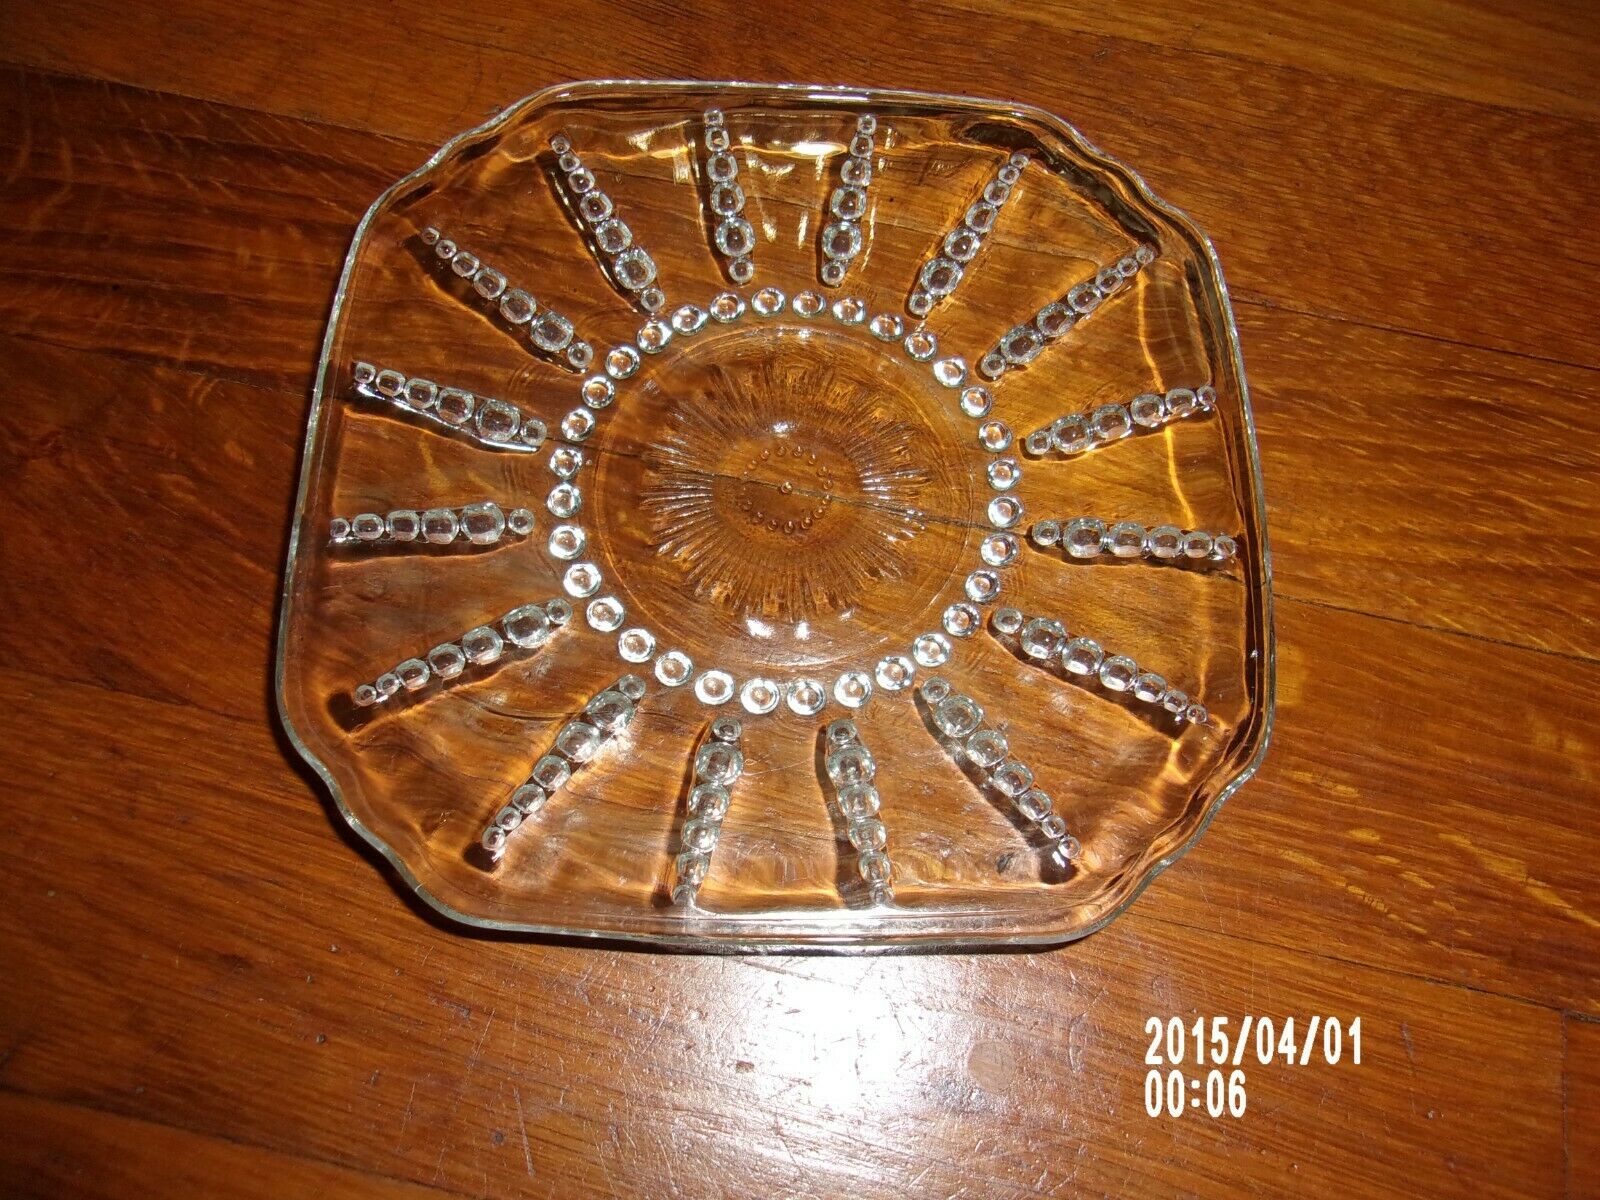 Depression Glass Clear 6" Bread & Butter Plate Columbia 1940 Federal Glass Co.